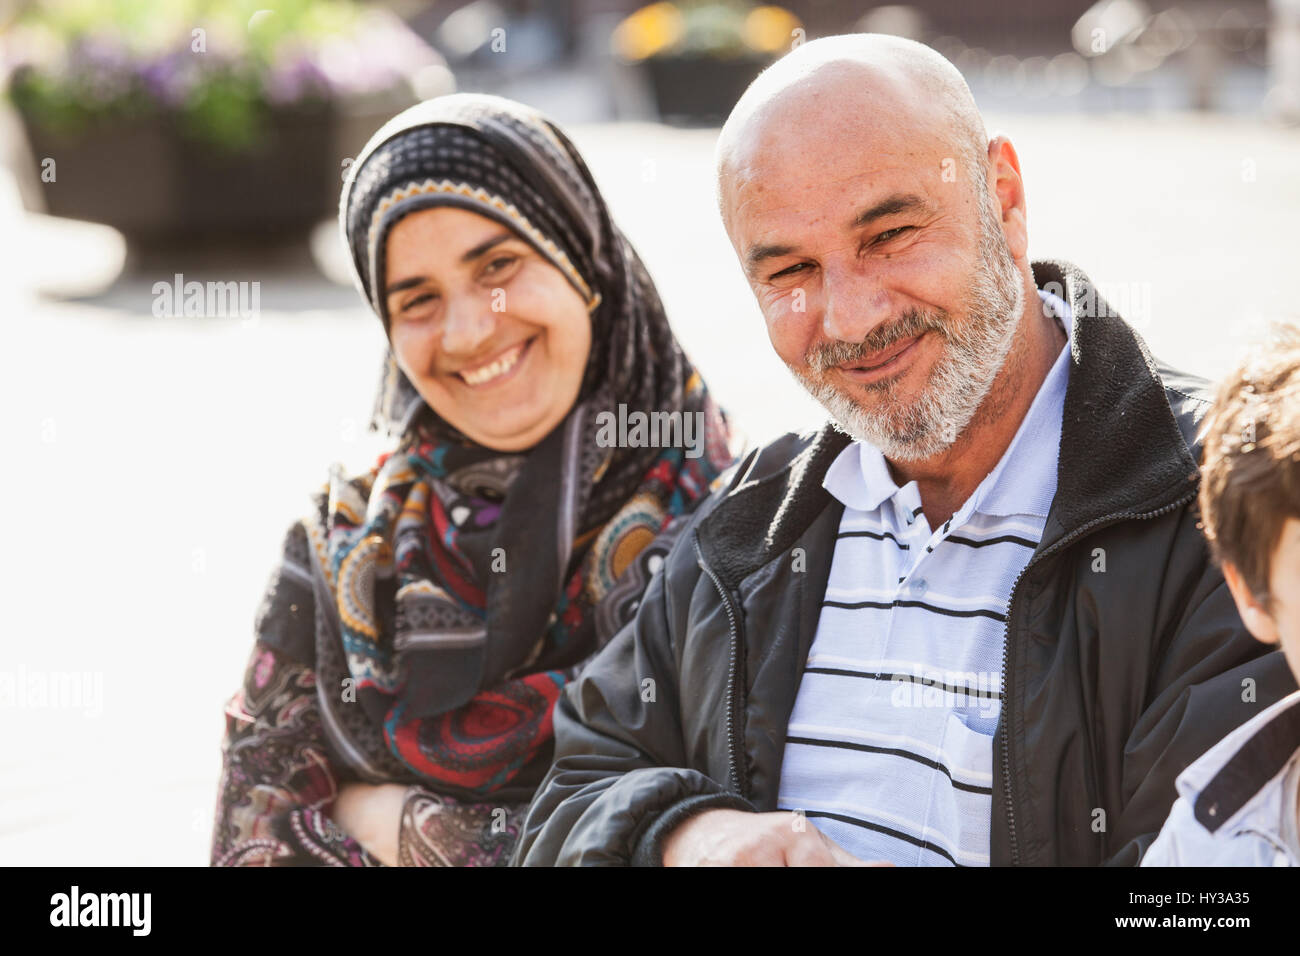 Sweden, Bleking, Solvesborg, Portrait of woman and man smiling Stock Photo